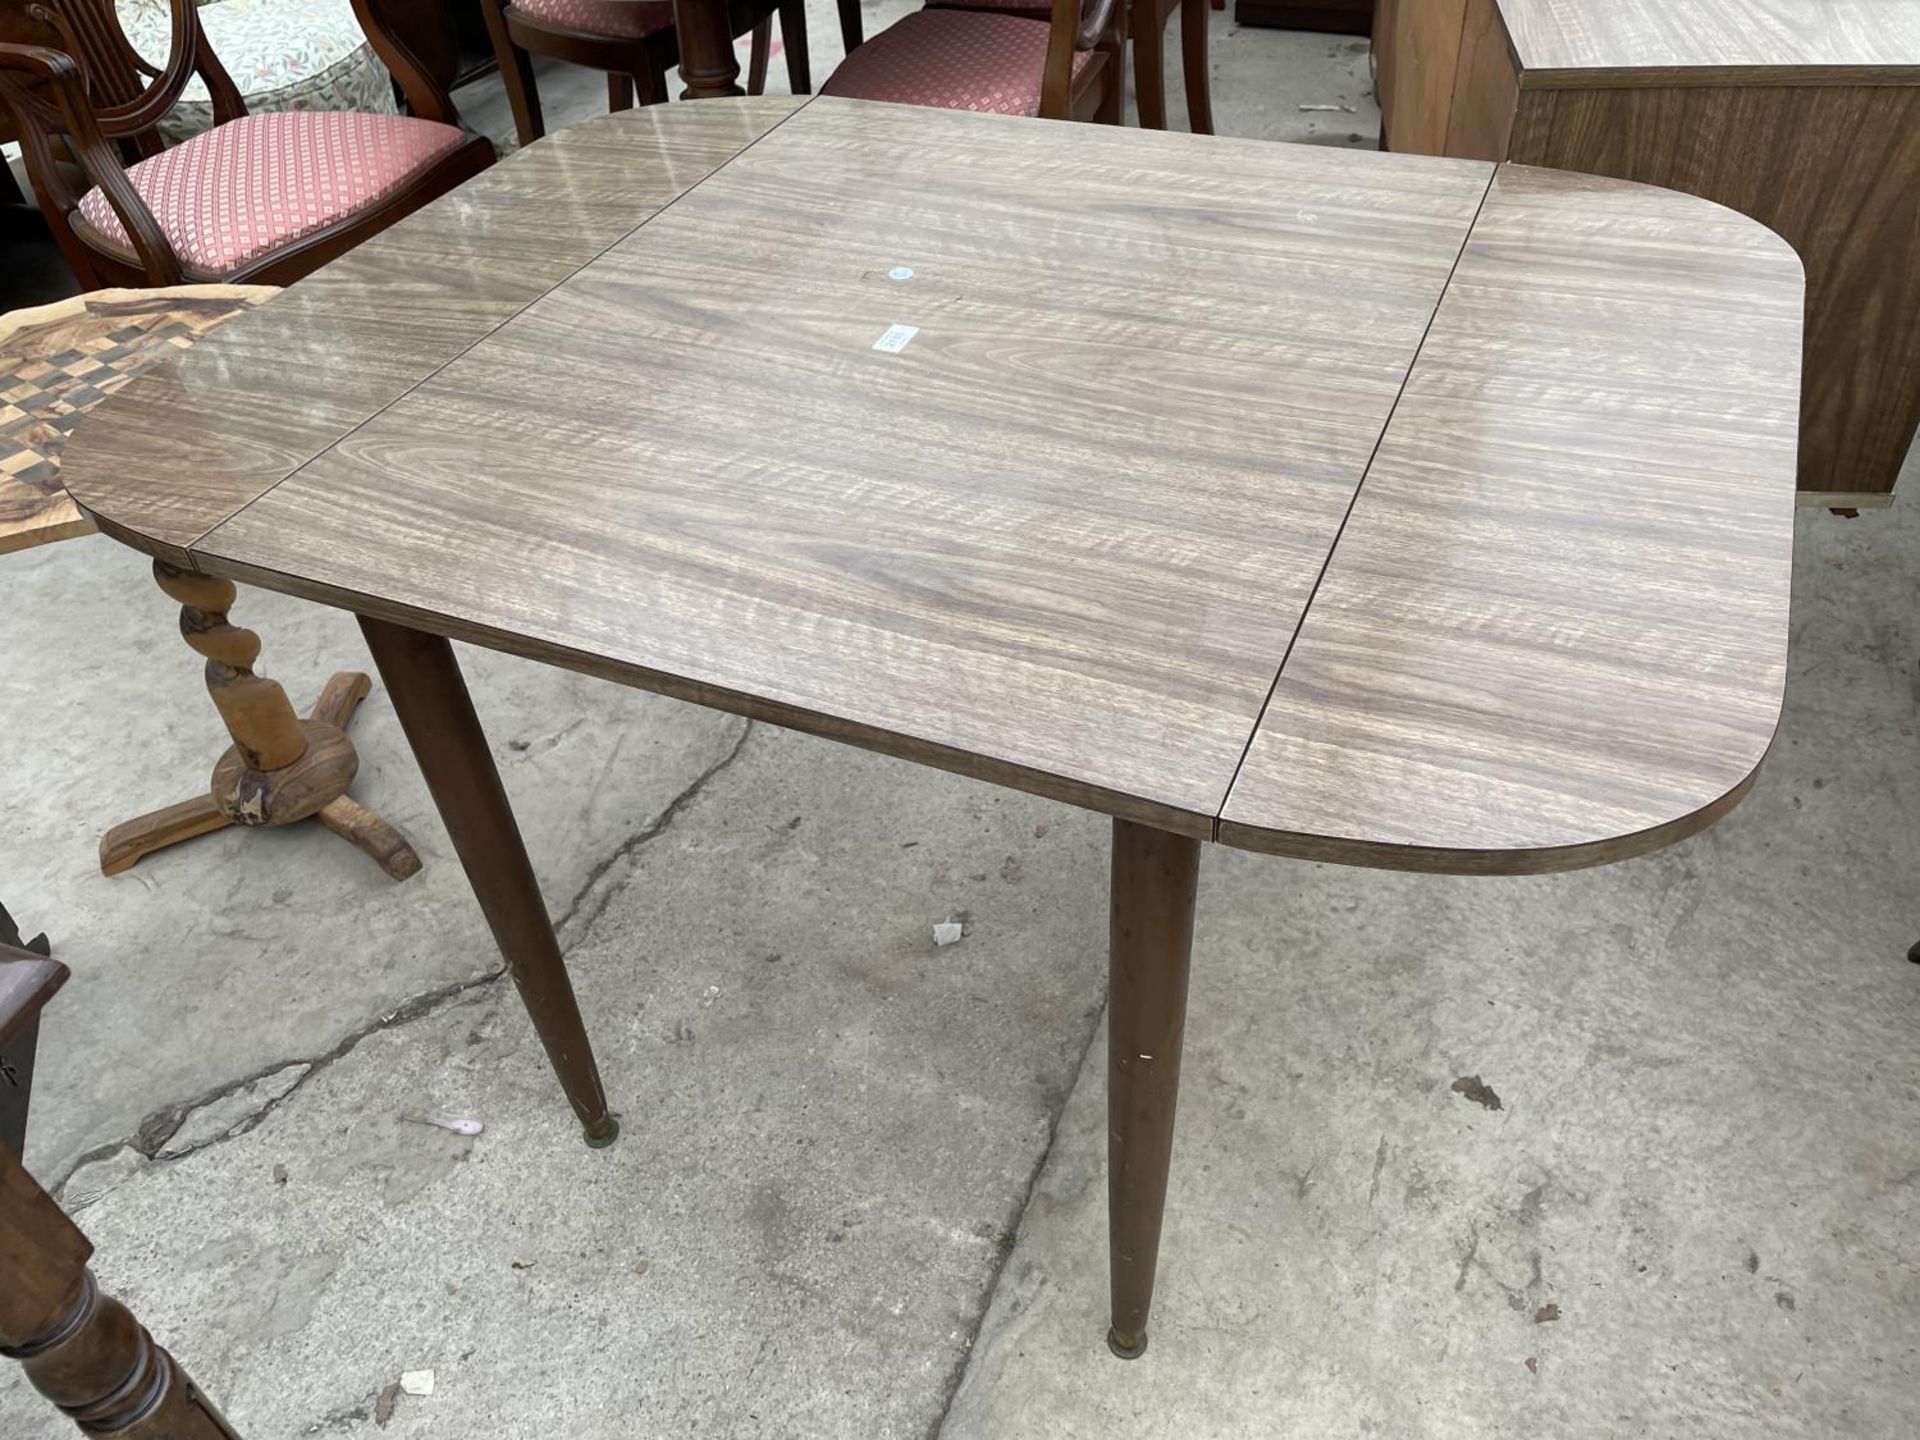 A 1950'S CREAMY WALNUT EFFECT DROP-LEAF DINING TABLE ON TAPERED LEGS